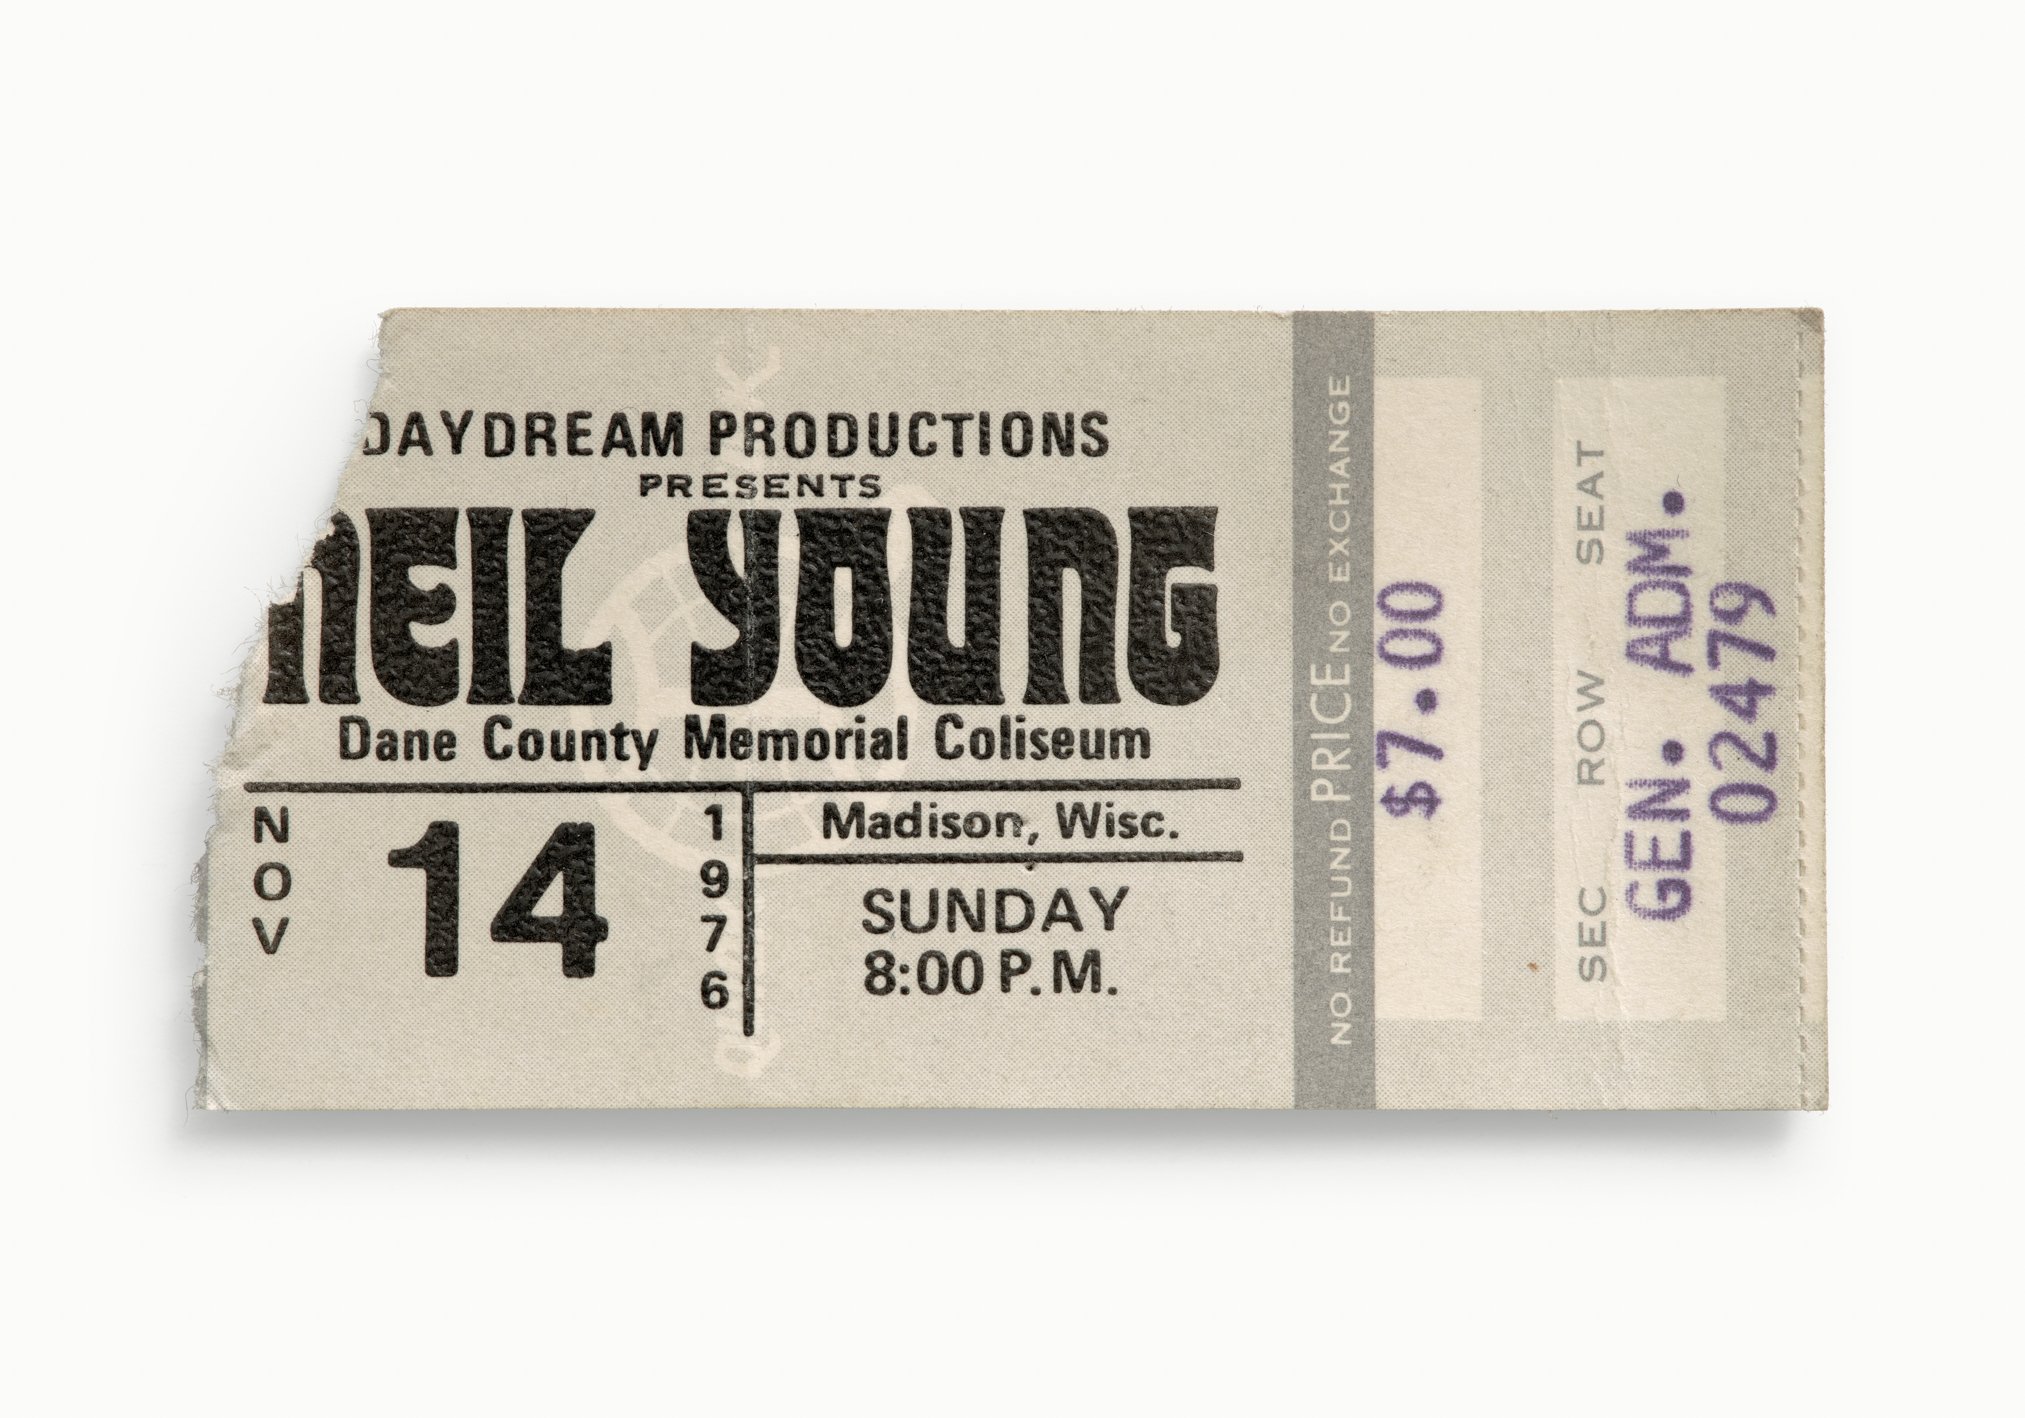 Neil Young, Dane County Memorial Coliseum, Madison, WI 1976